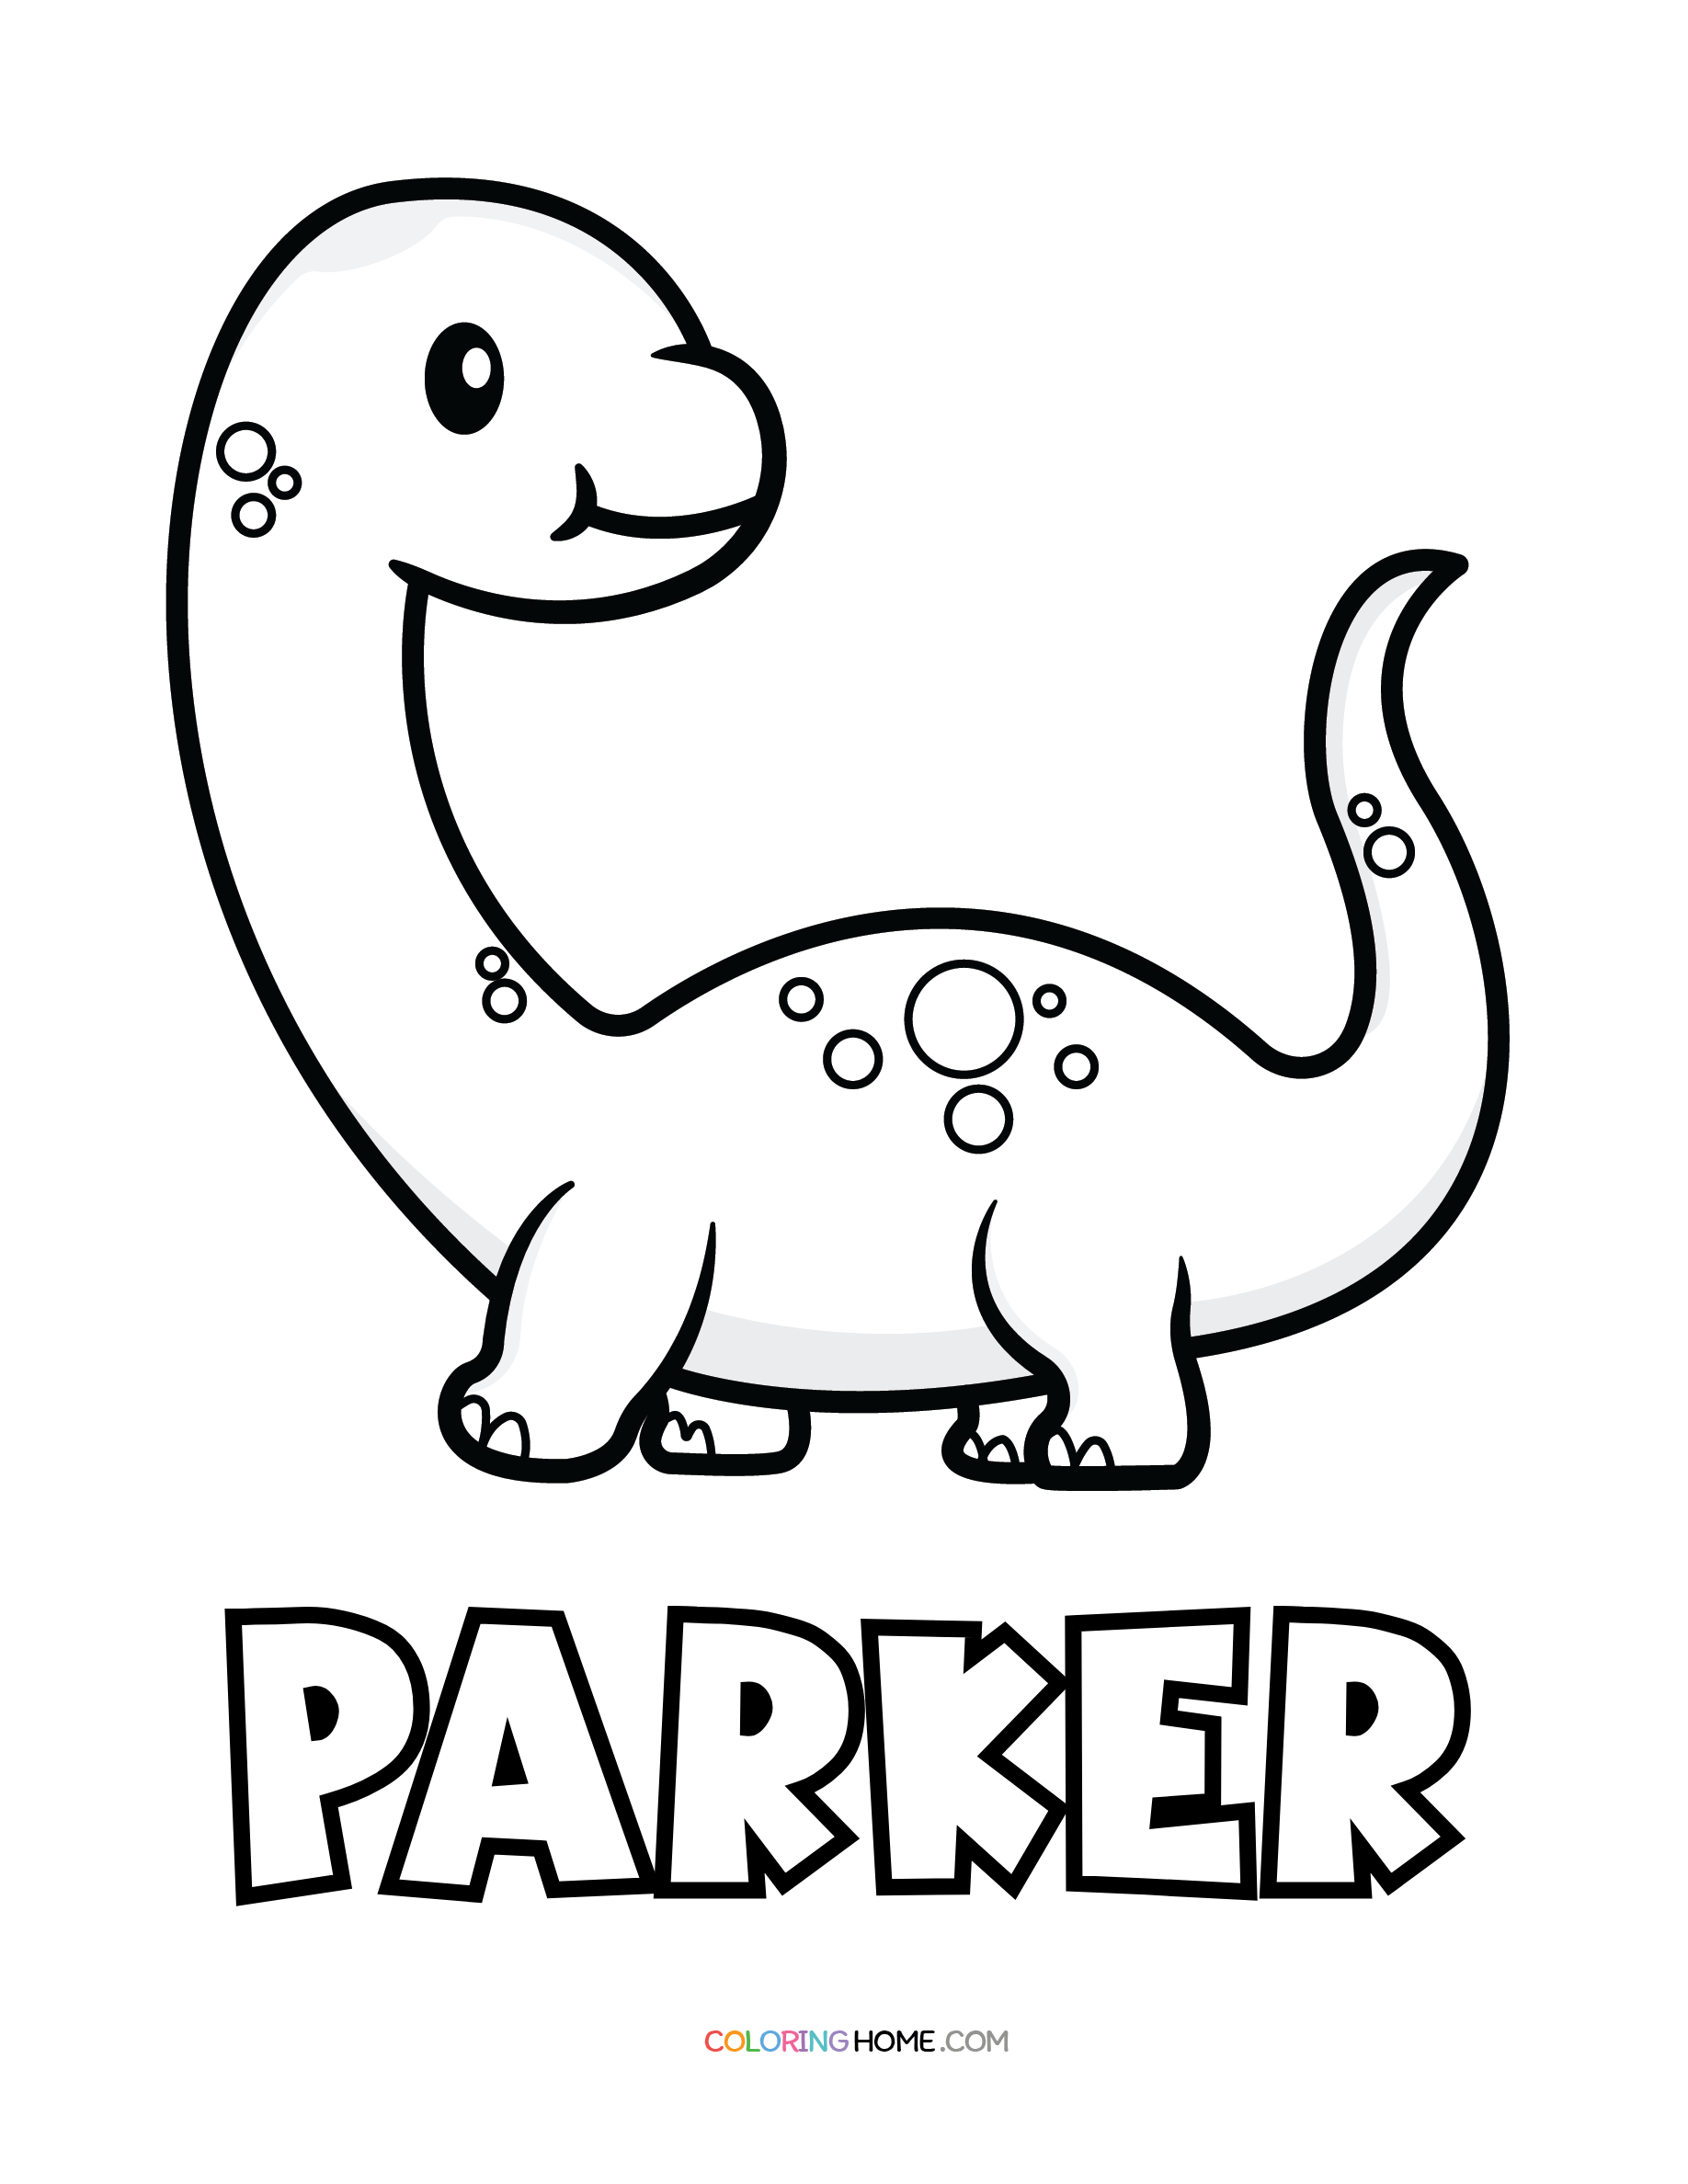 Parker dinosaur coloring page